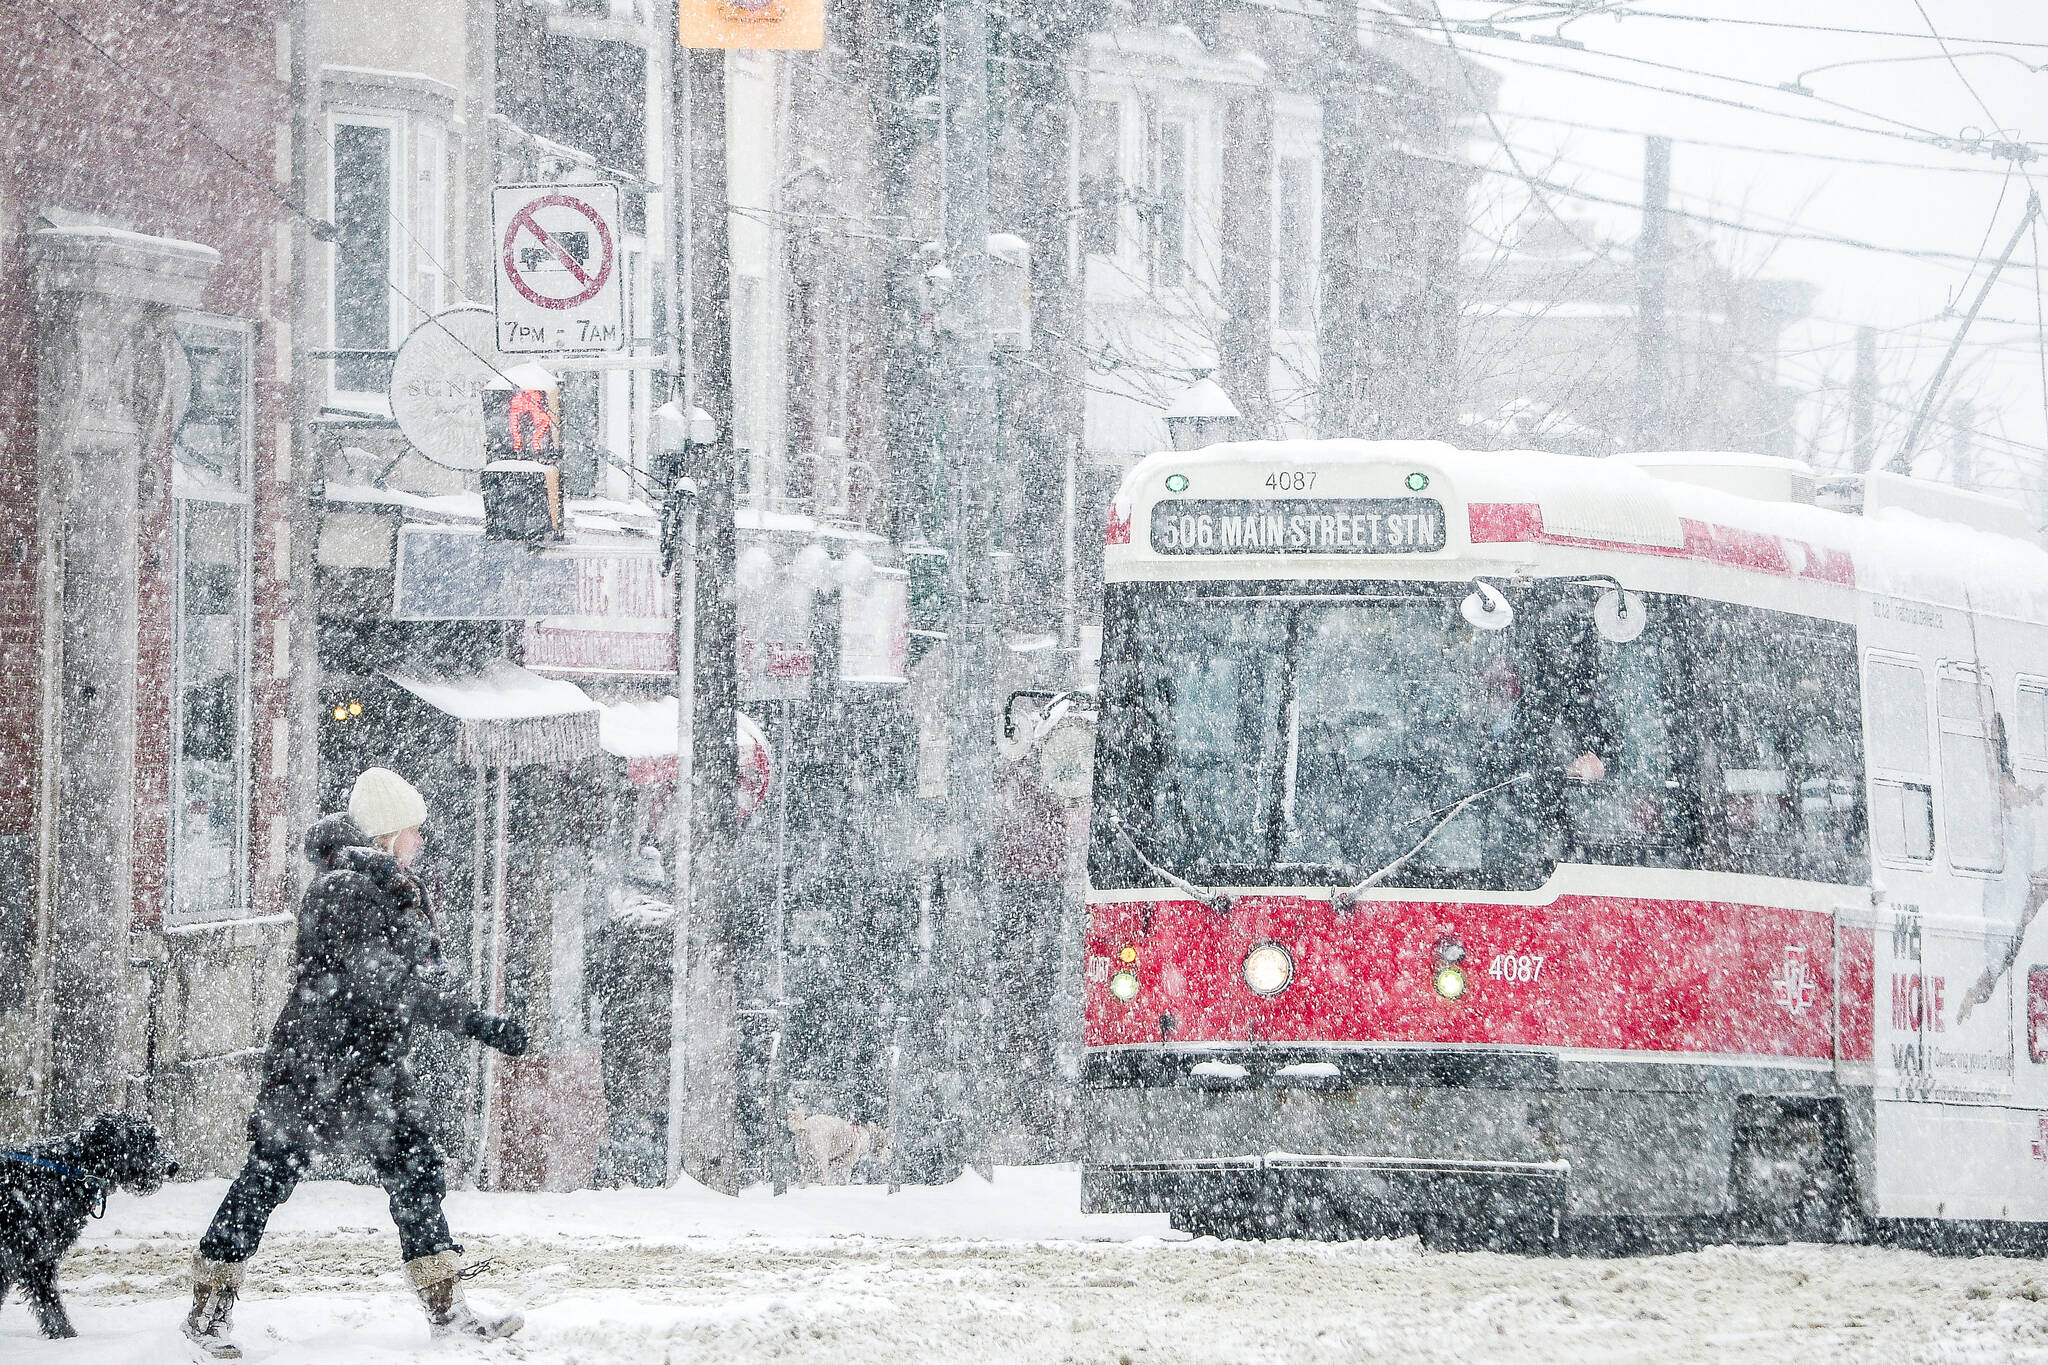 20 scenic photos of Toronto drenched in snow this weekend